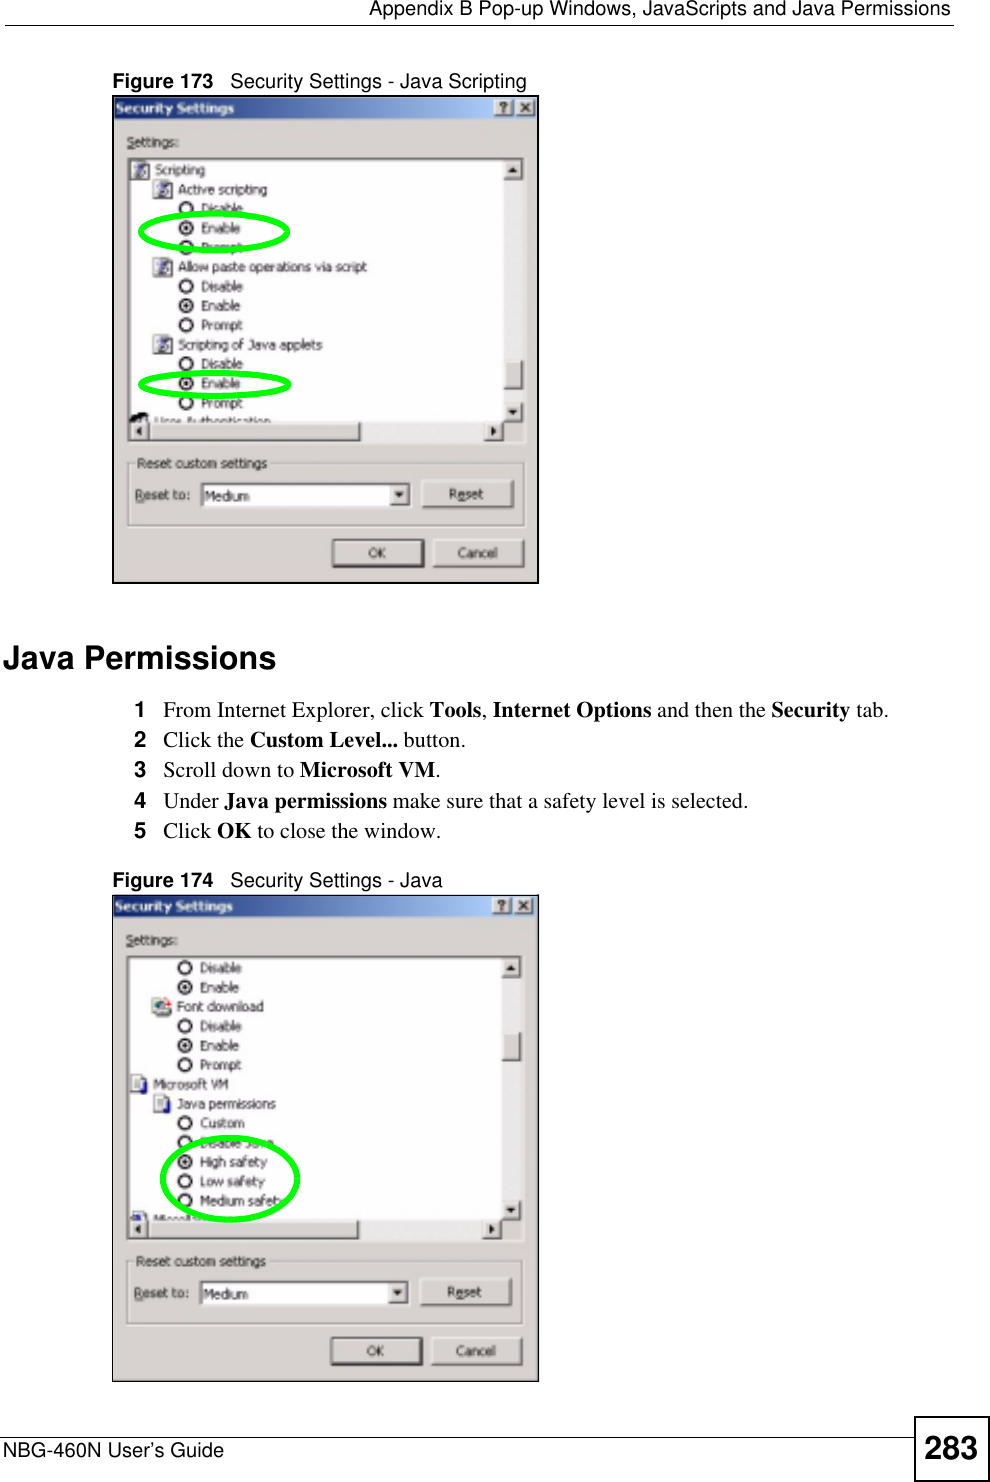  Appendix B Pop-up Windows, JavaScripts and Java PermissionsNBG-460N User’s Guide 283Figure 173   Security Settings - Java ScriptingJava Permissions1From Internet Explorer, click Tools,Internet Options and then the Security tab. 2Click the Custom Level... button. 3Scroll down to Microsoft VM.4Under Java permissions make sure that a safety level is selected.5Click OK to close the window.Figure 174   Security Settings - Java 